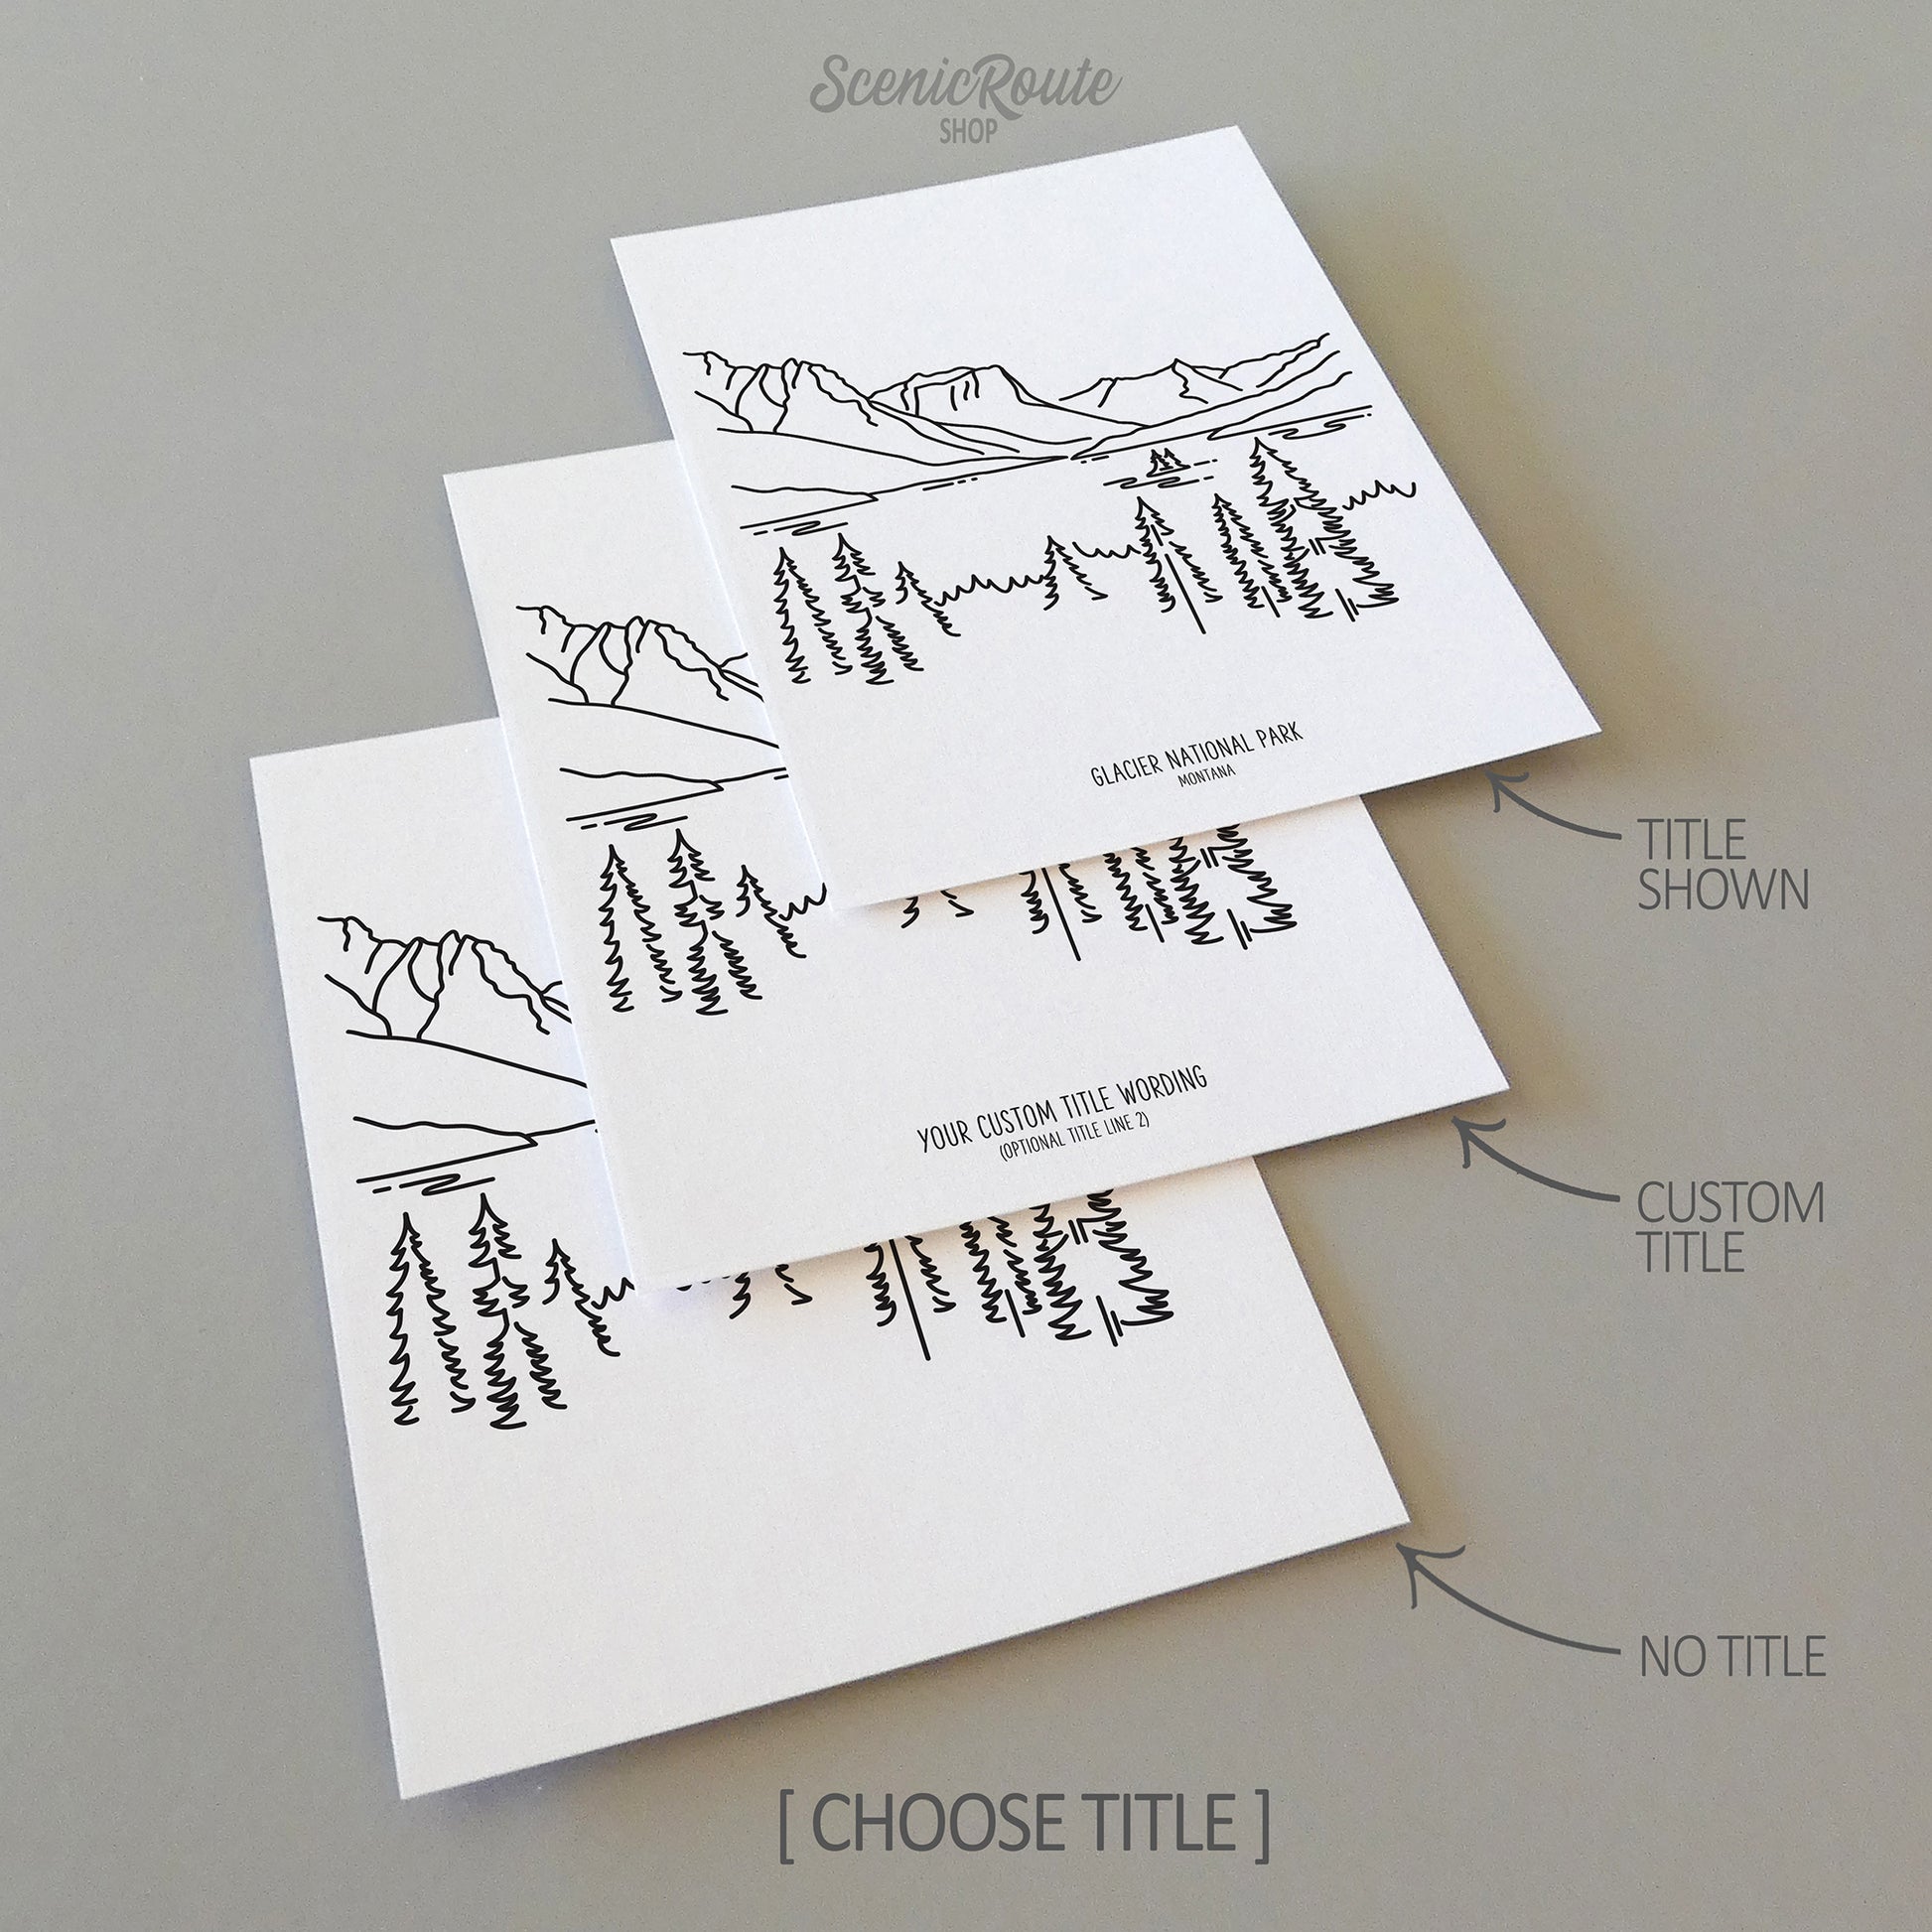 Three line art drawings of Glacier National Park on white linen paper with a gray background. The pieces are shown with title options that can be chosen and personalized.